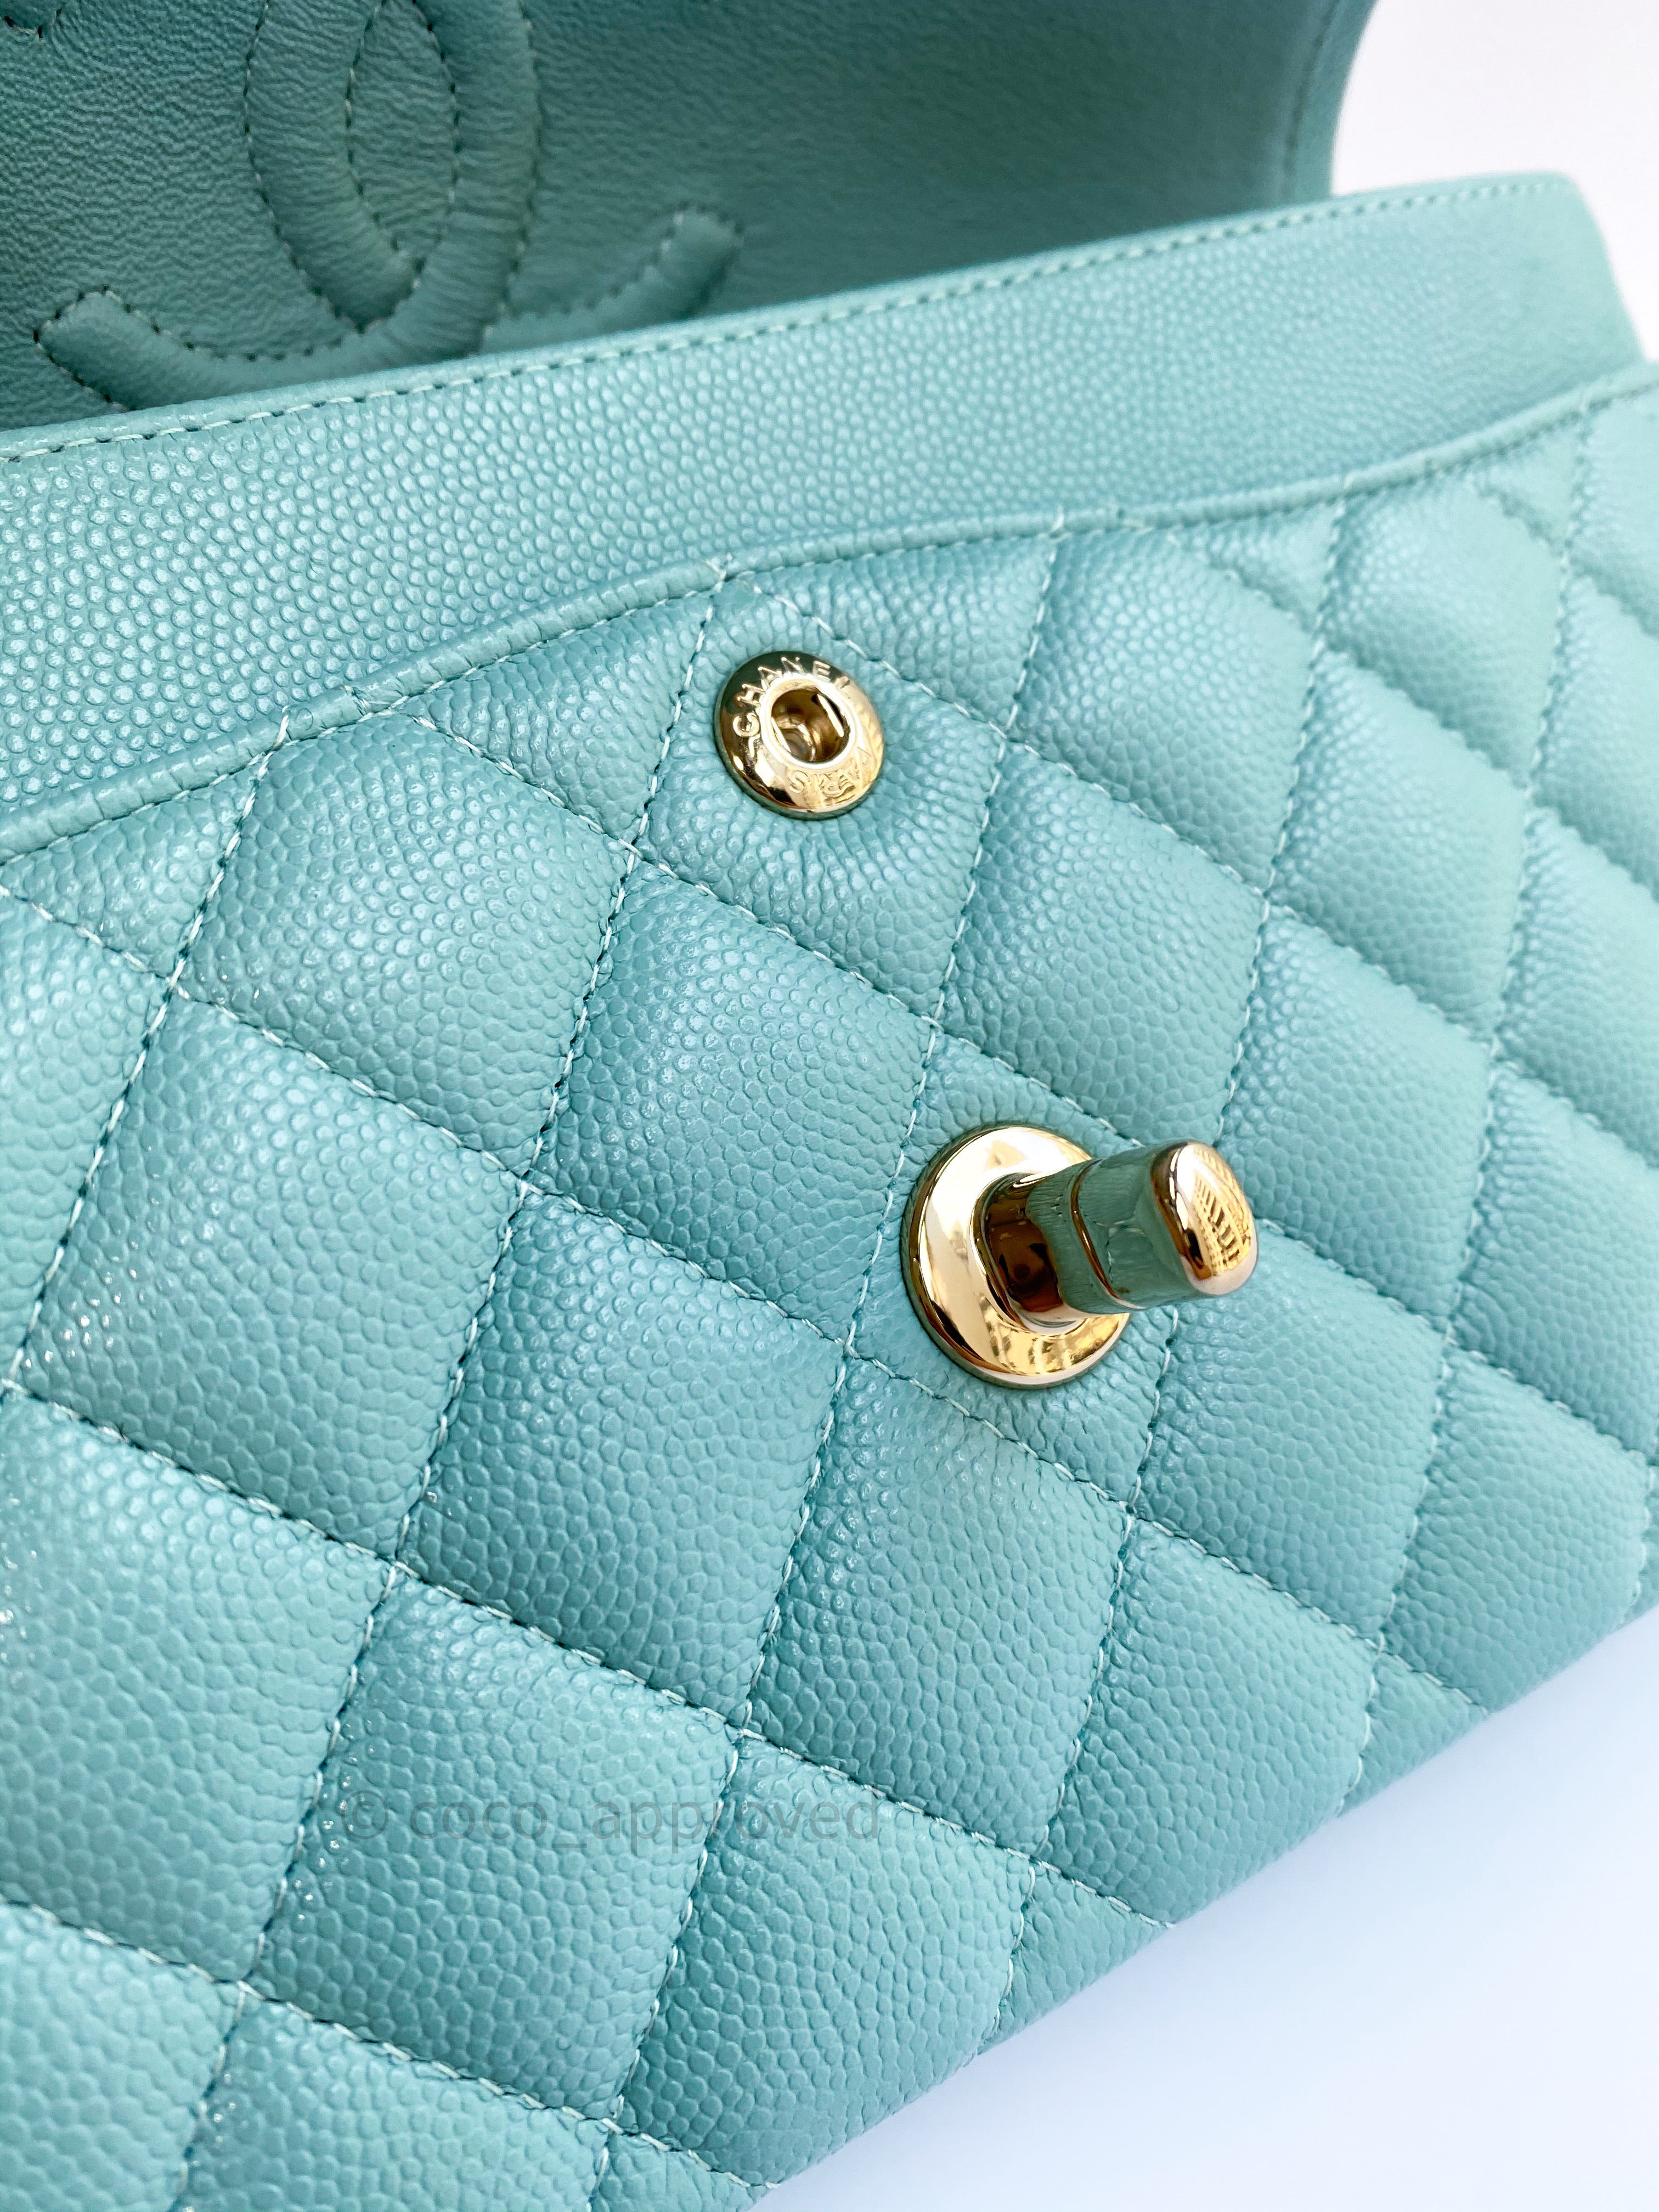 Chanel Classic Medium Double Flap 20C Tiffany Blue Quilted Caviar